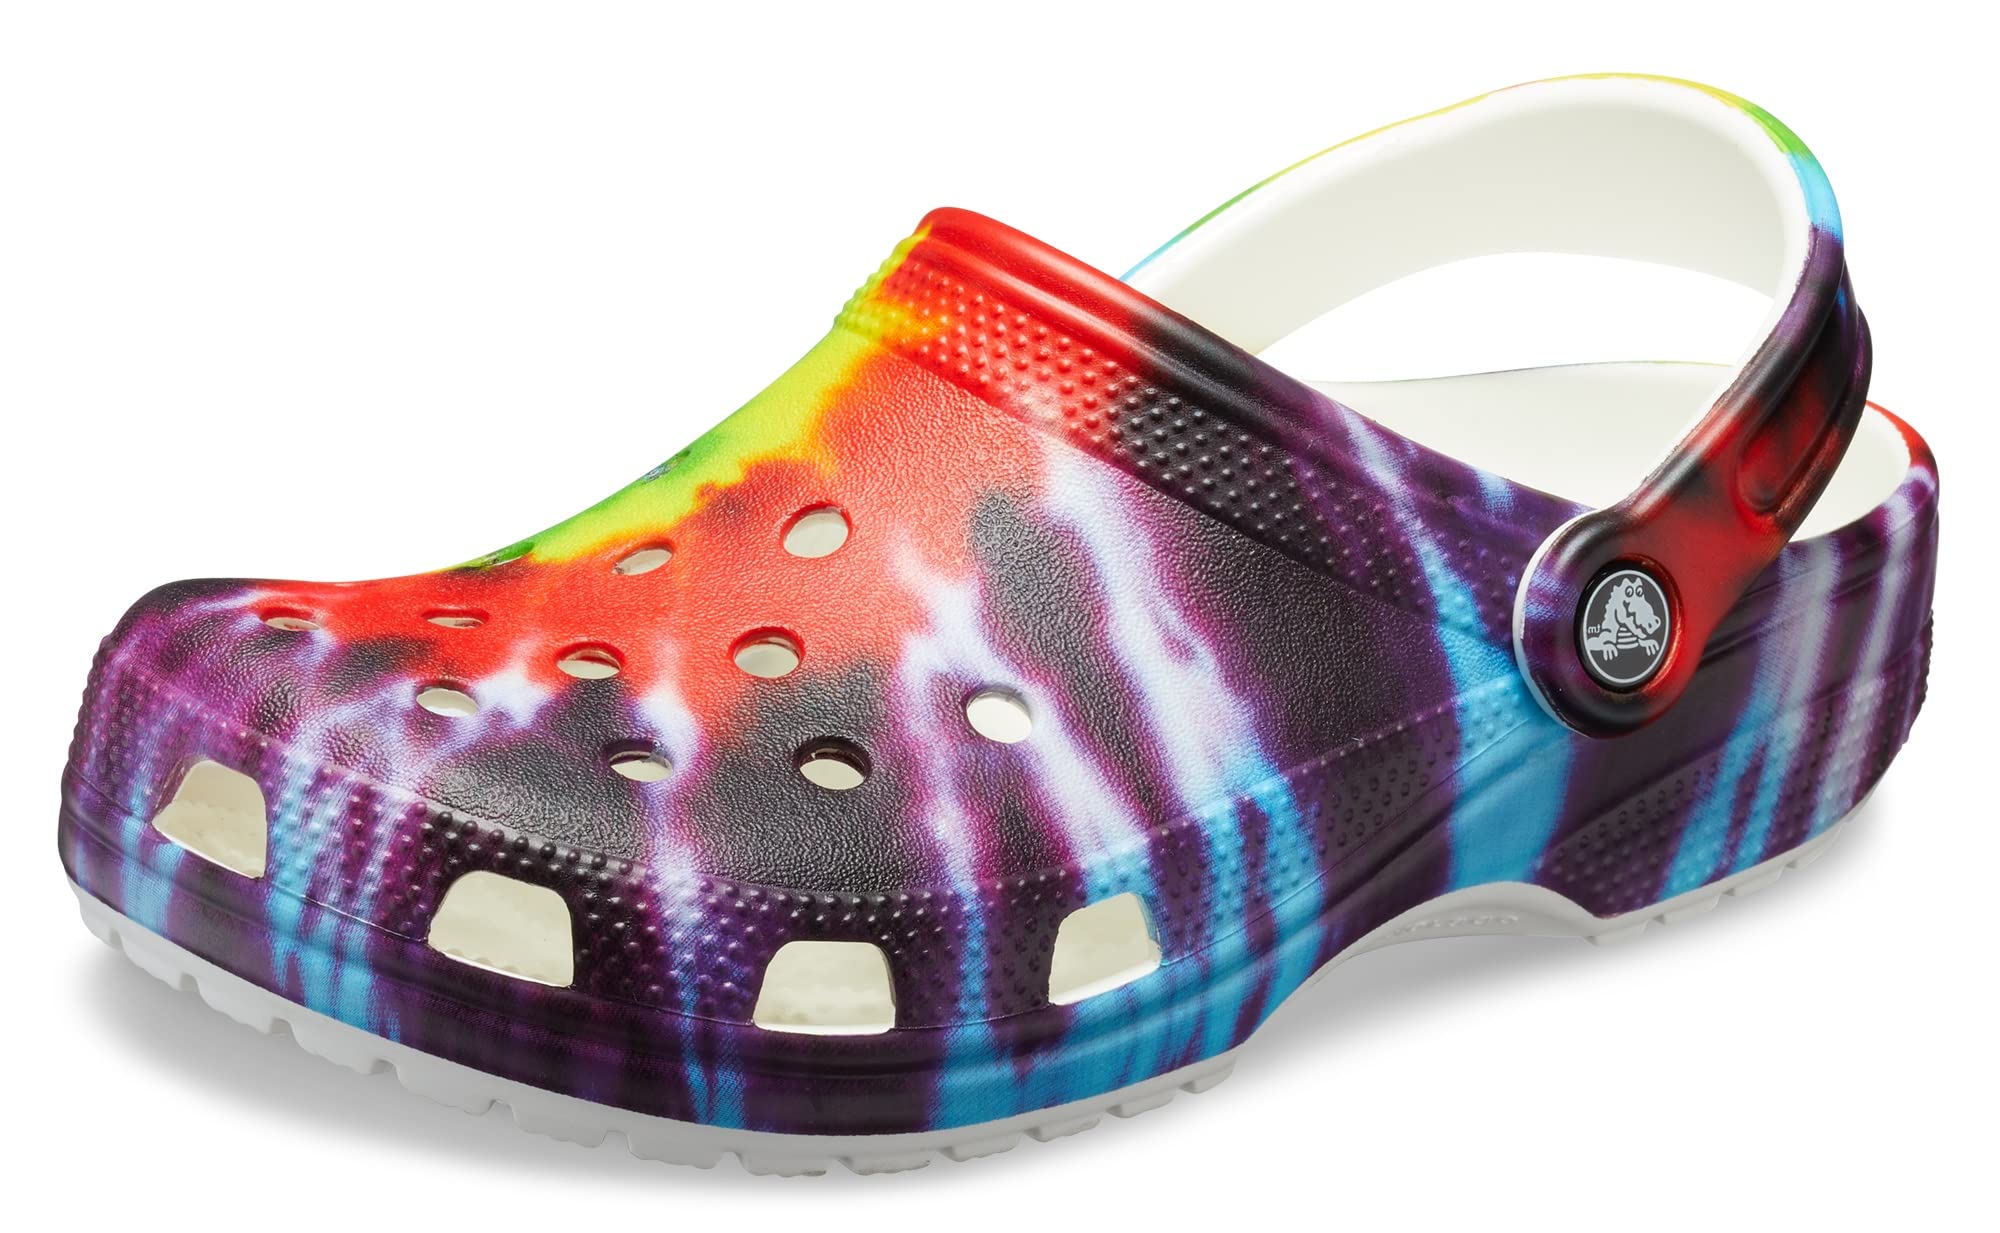 Crocs Unisex-Adult Classic Tie Dye Clogs (Multi) $24.99 + Free Shipping w/ Prime or on $35+